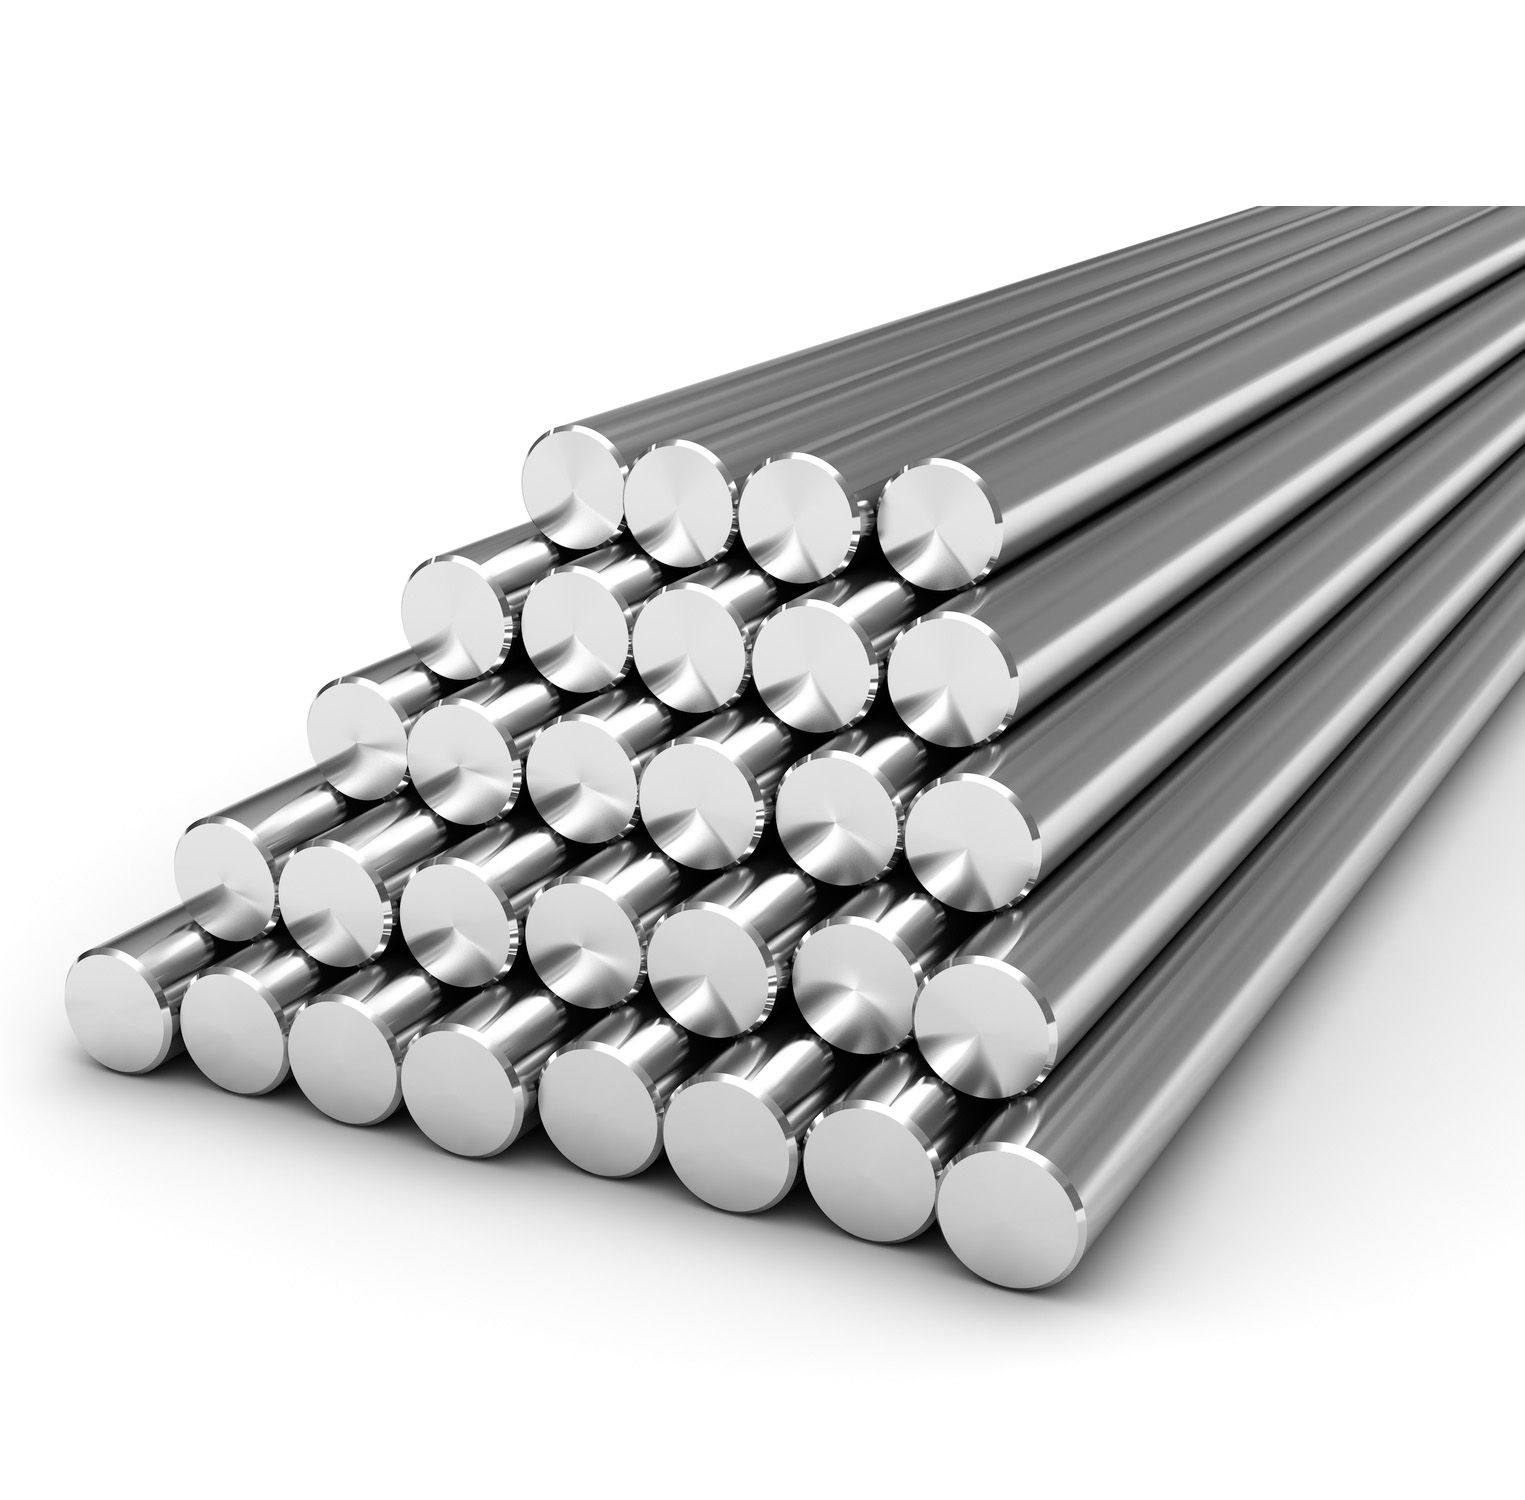 1/4"  Stainless Steel Rod Bar Round 304   50 Pcs   1" Long 